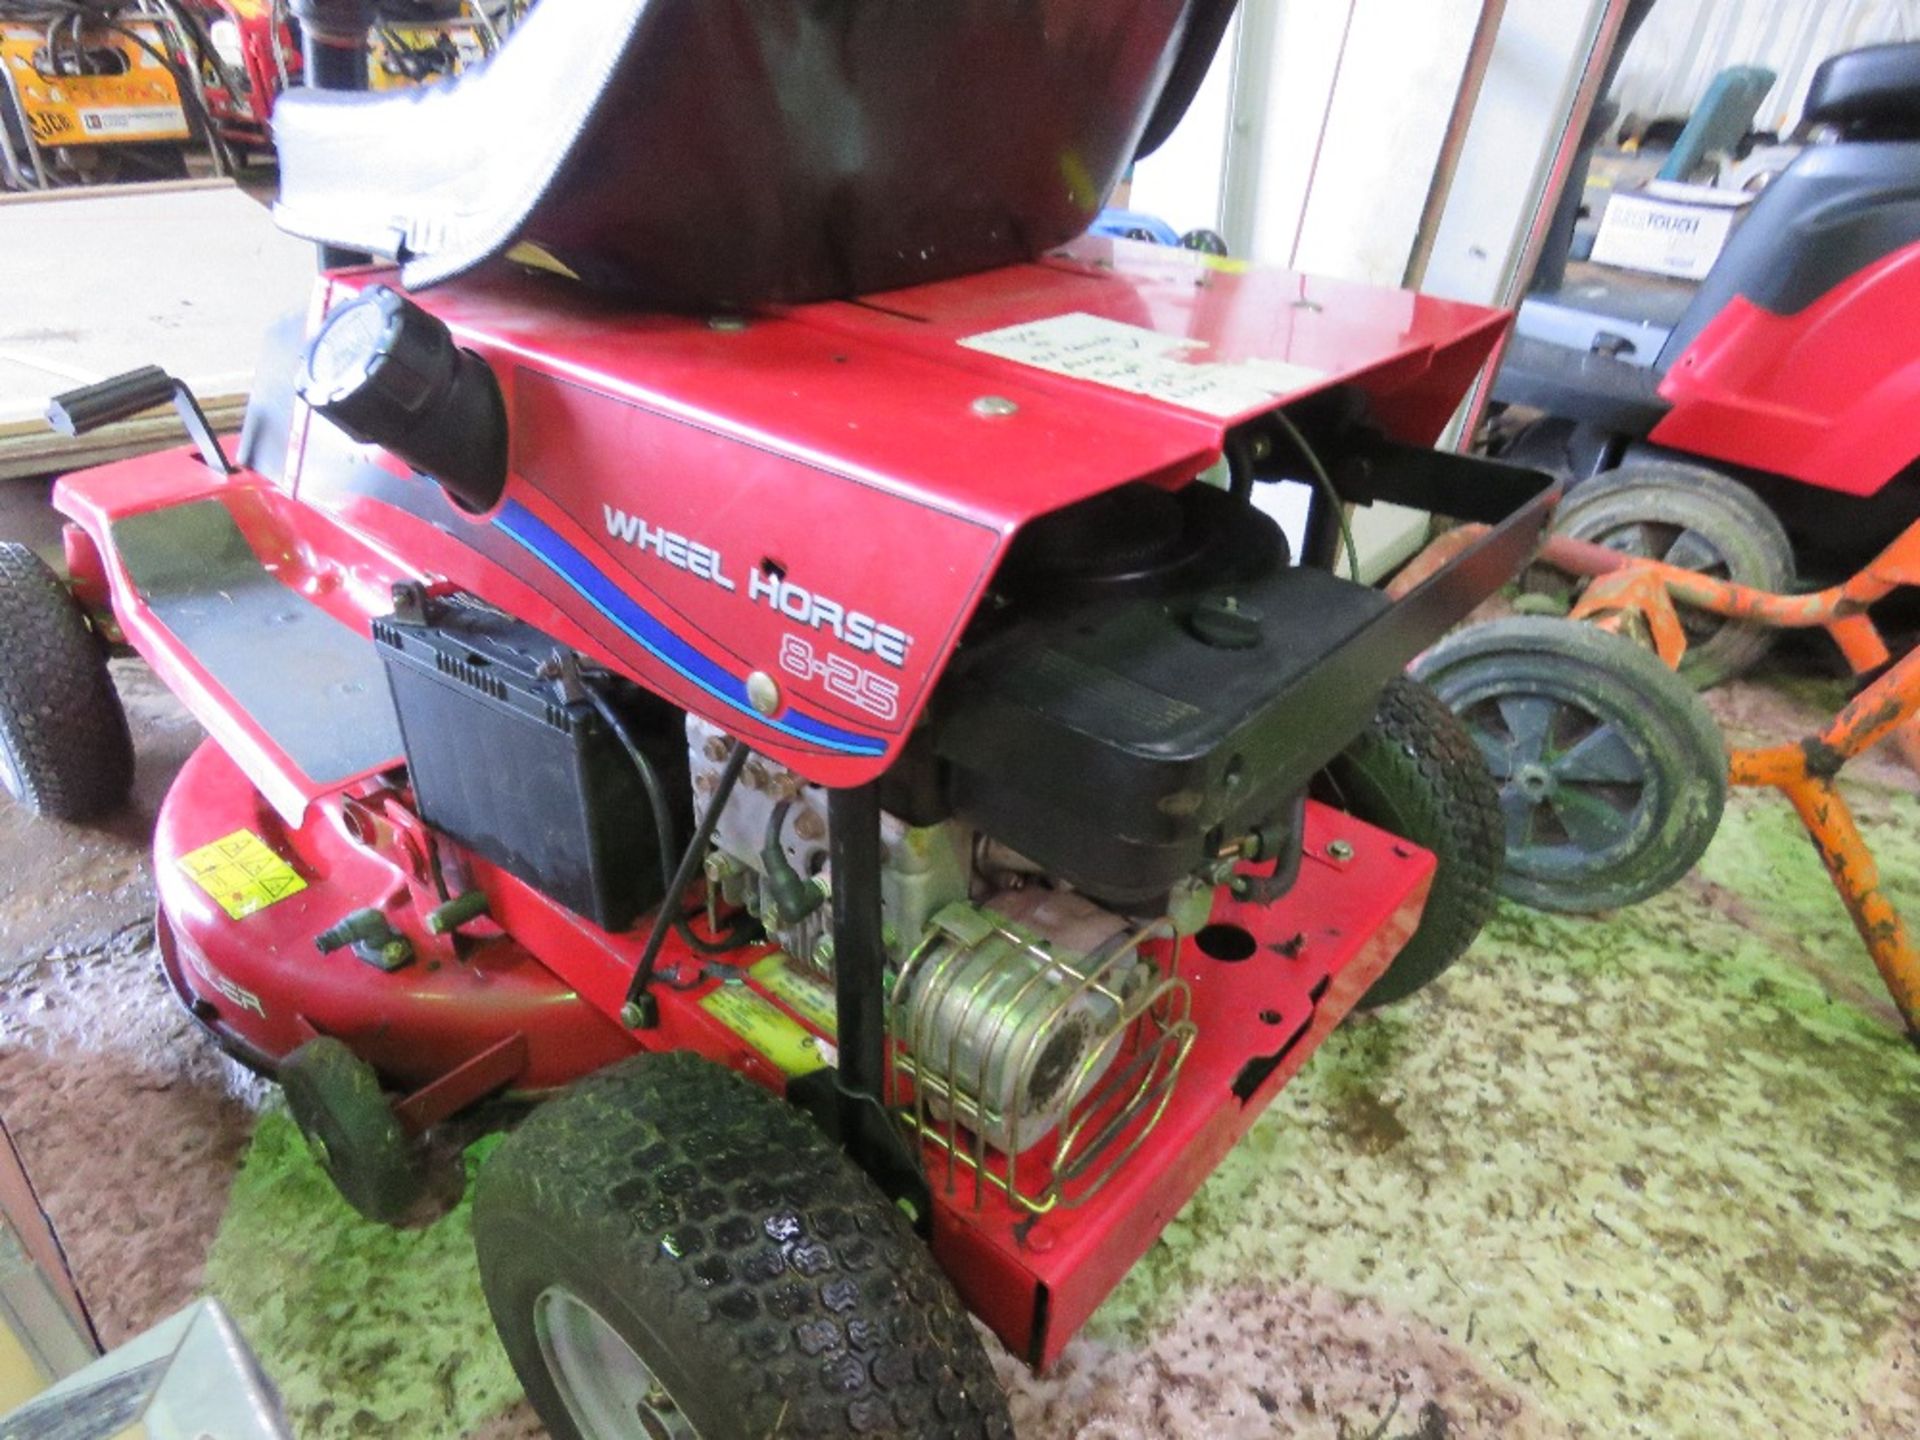 WHEELHORSE 8-25 RIDE ON MOWER. BATTERY LOW, UNTESTED.....THIS LOT IS SOLD UNDER THE AUCTIONEERS MARG - Image 6 of 7